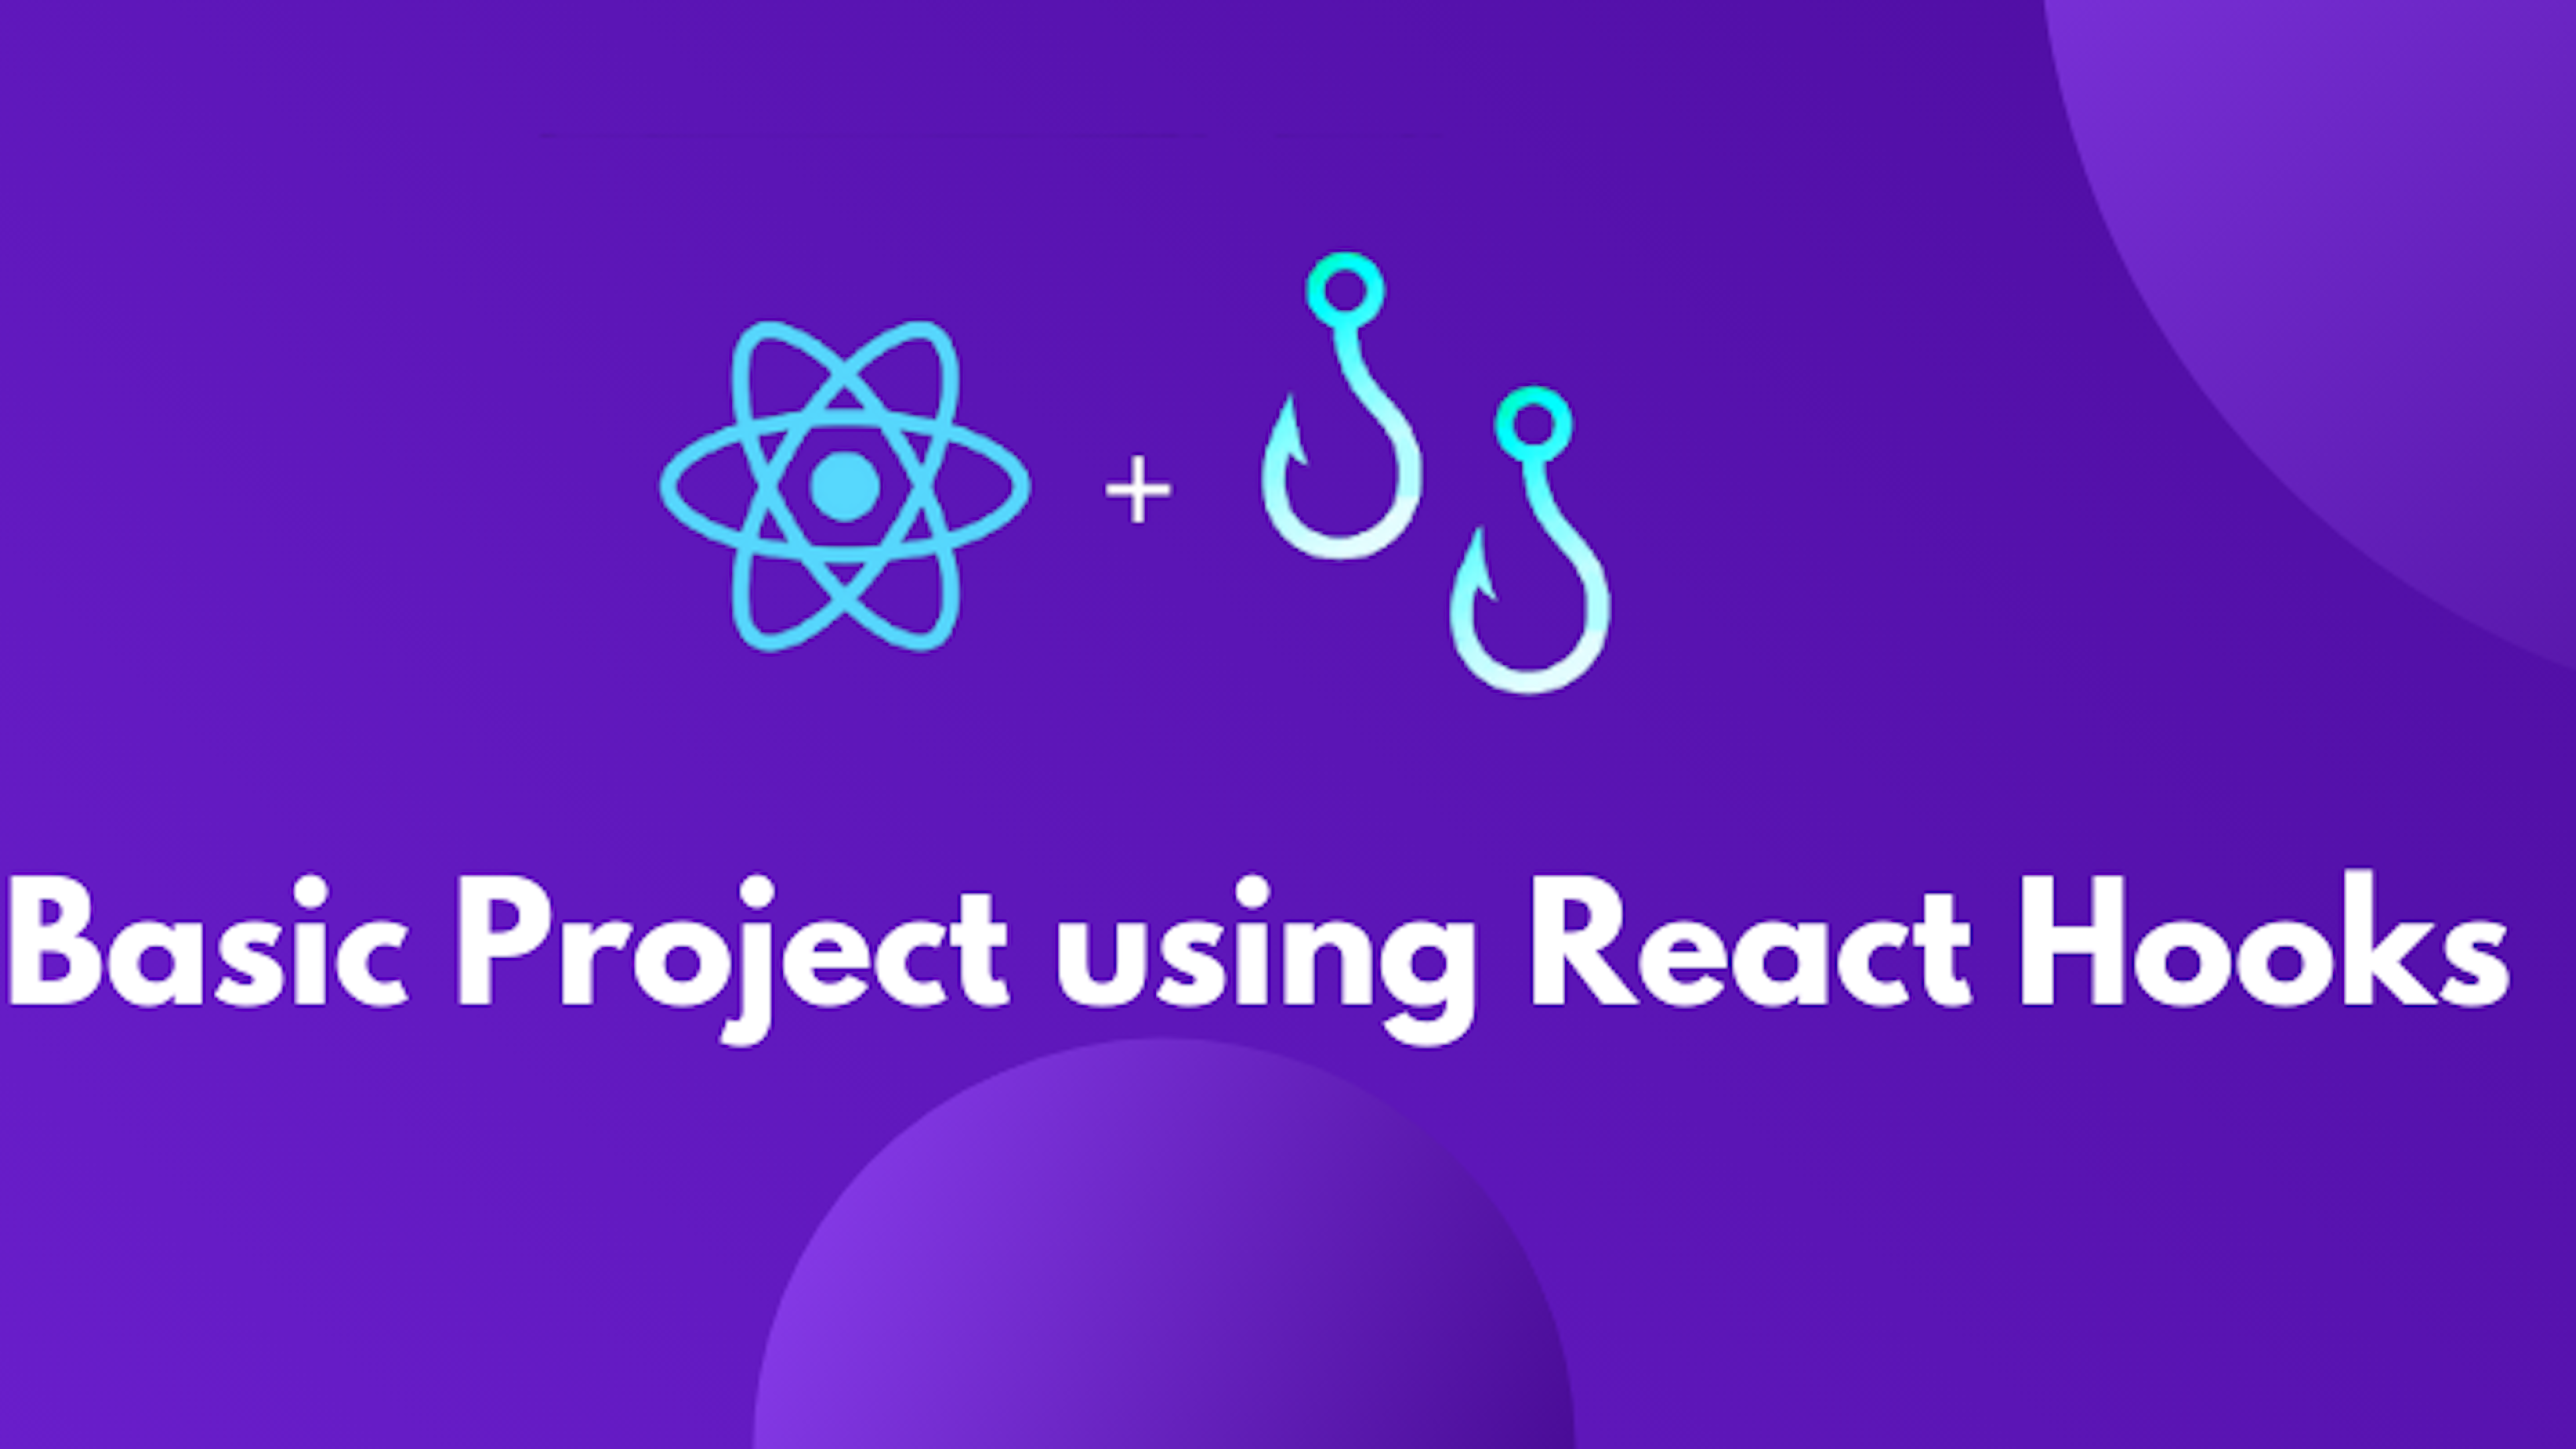 How to Build Basic Projects Using React Hooks | A Step-by-step Guide